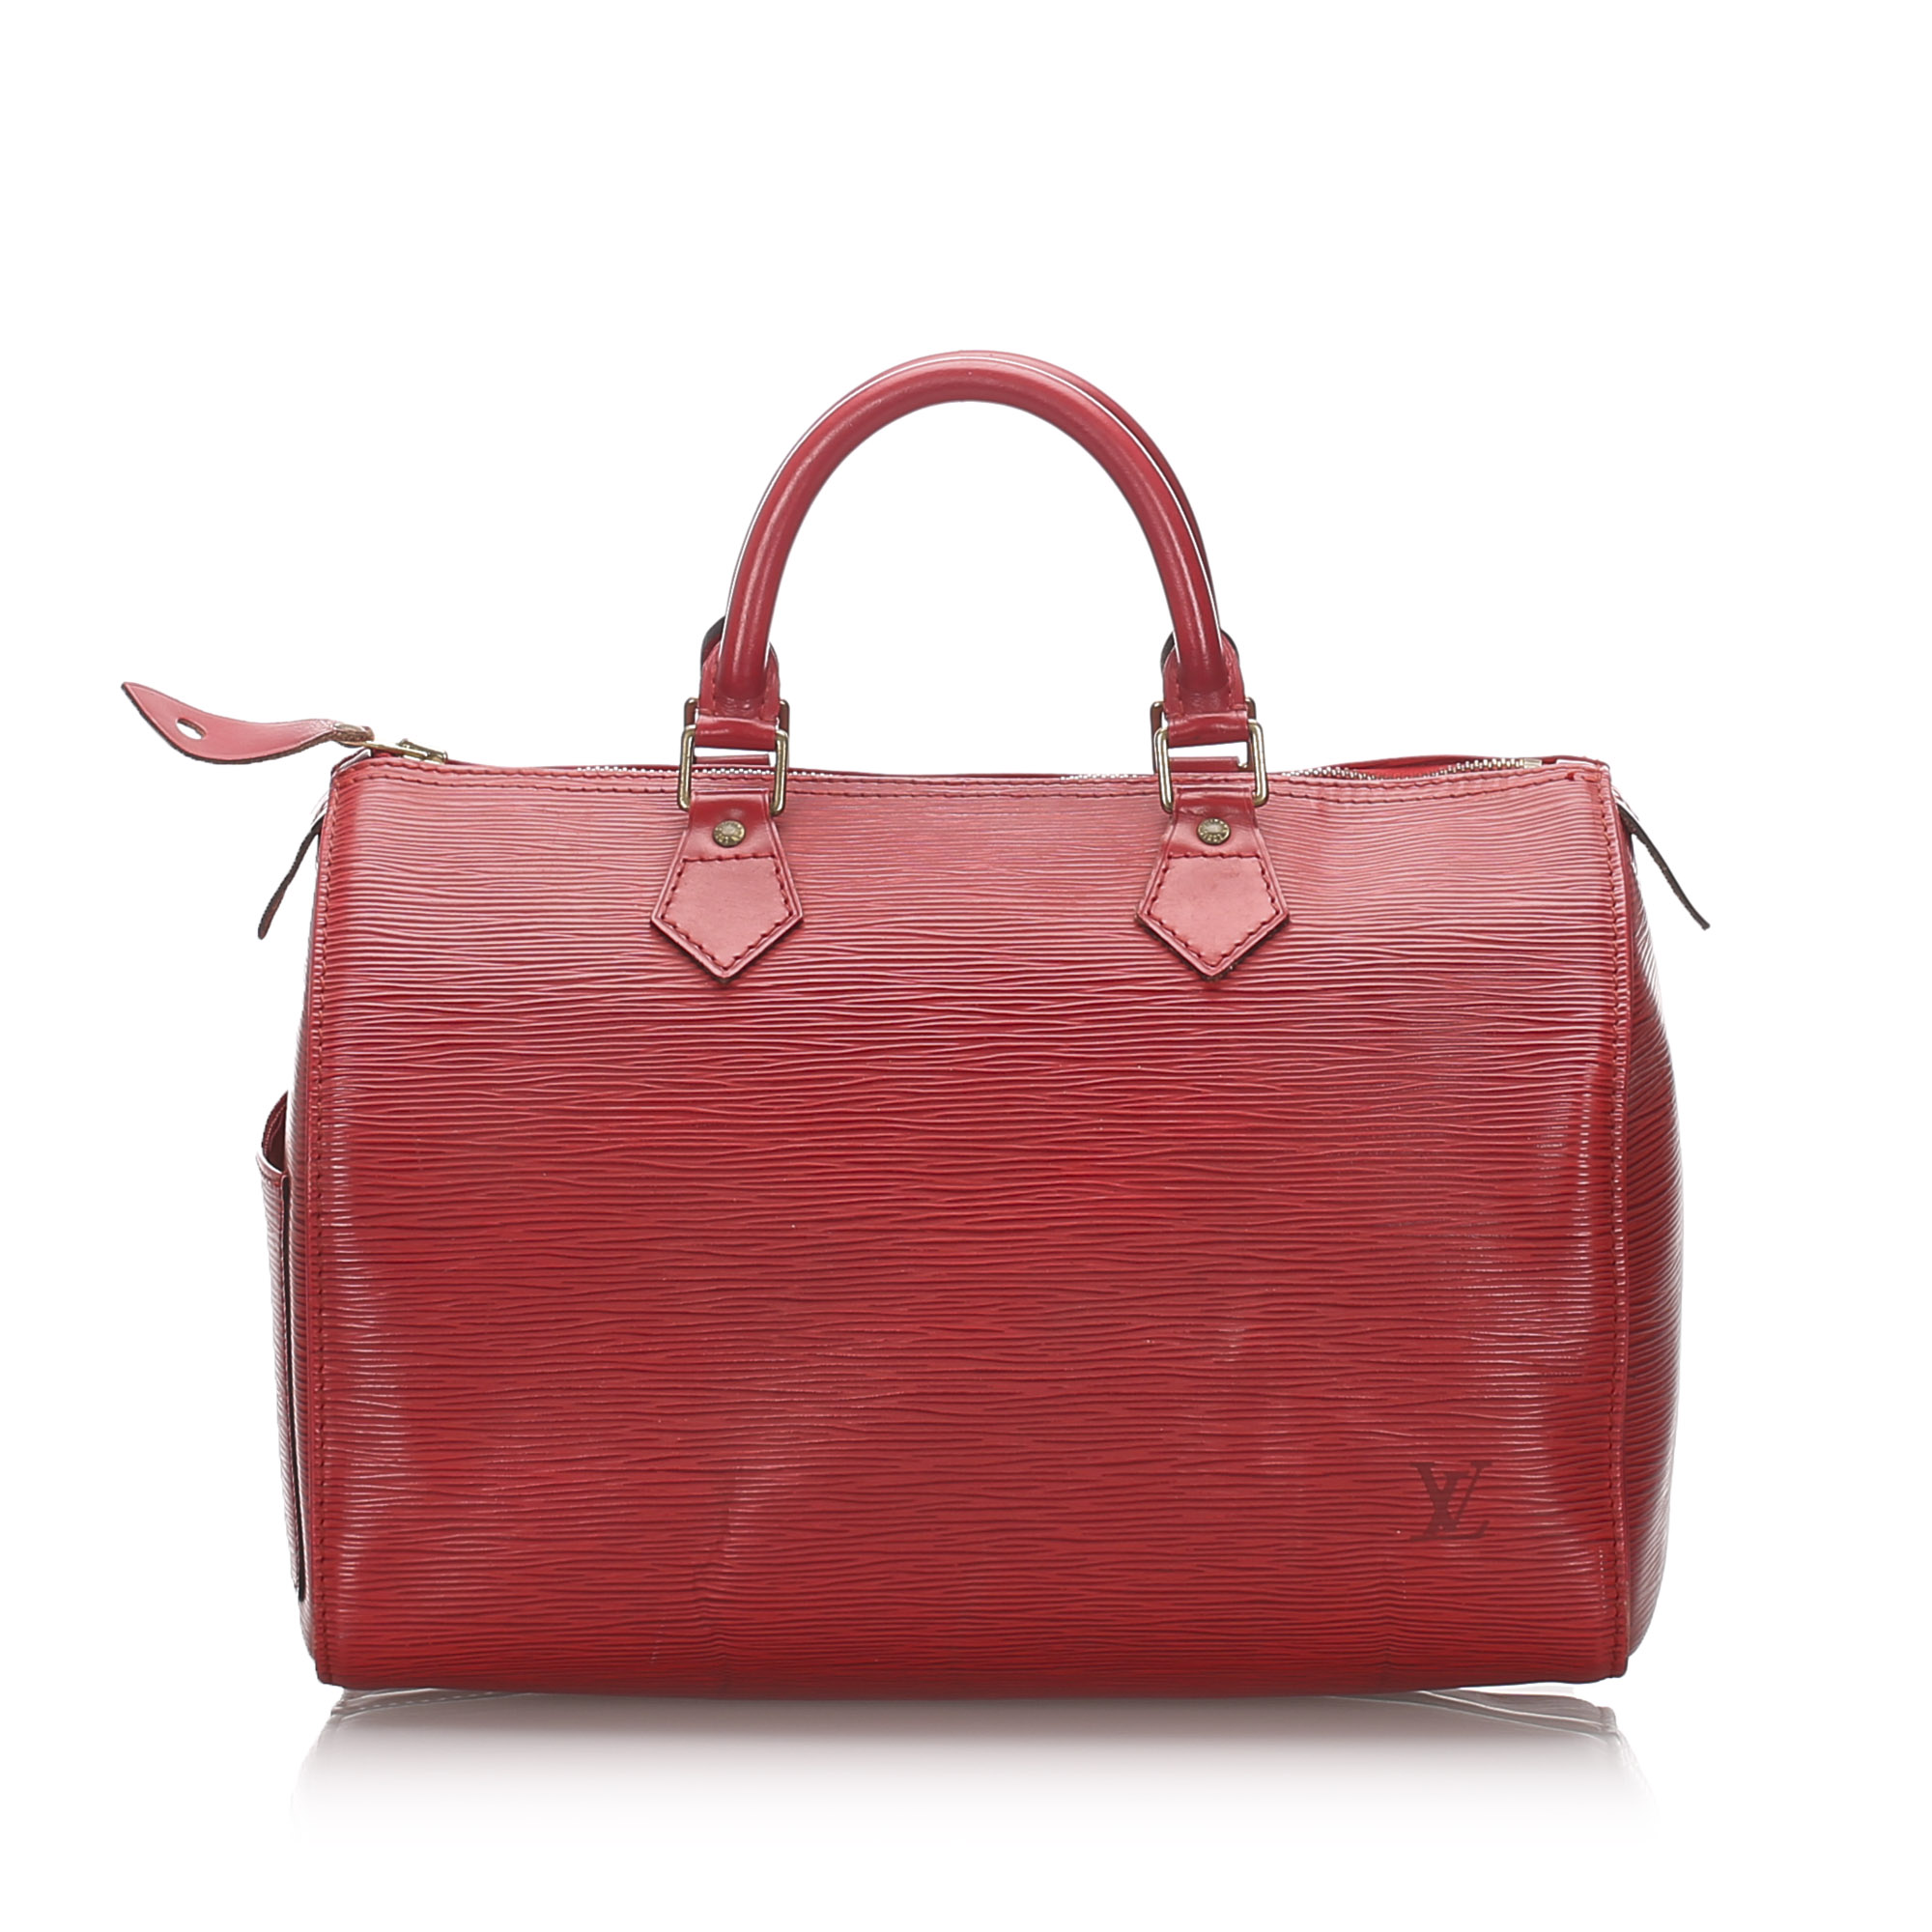 Pre-Loved Louis Vuitton Red Epi Leather Speedy 30 France | eBay